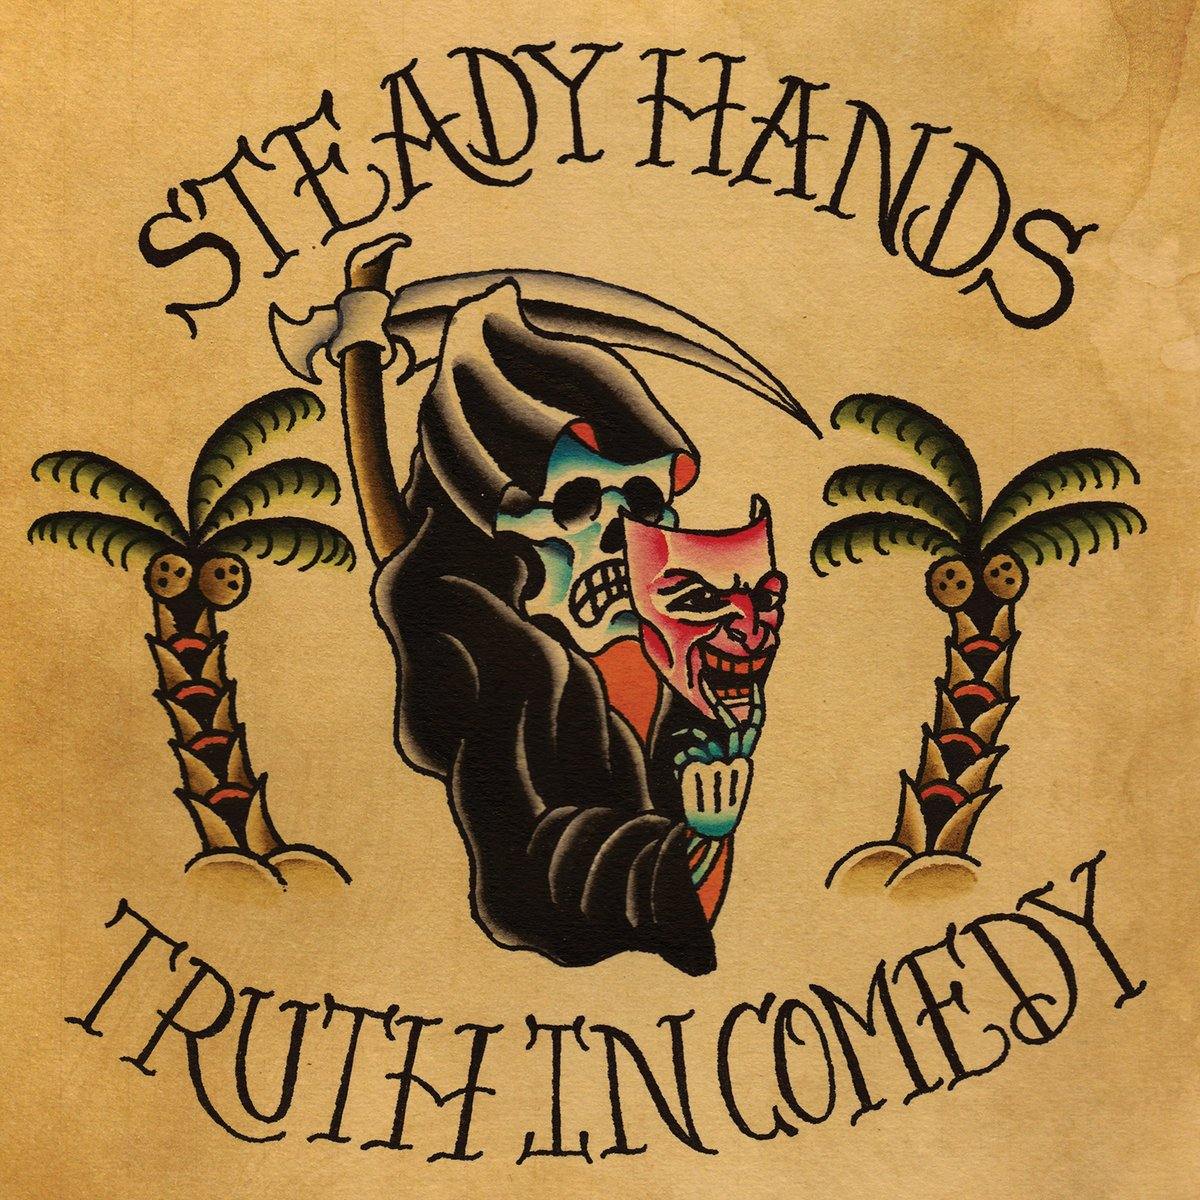 Buy – Steady Hands "Truth in Comedy" 12" – Band & Music Merch – Cold Cuts Merch